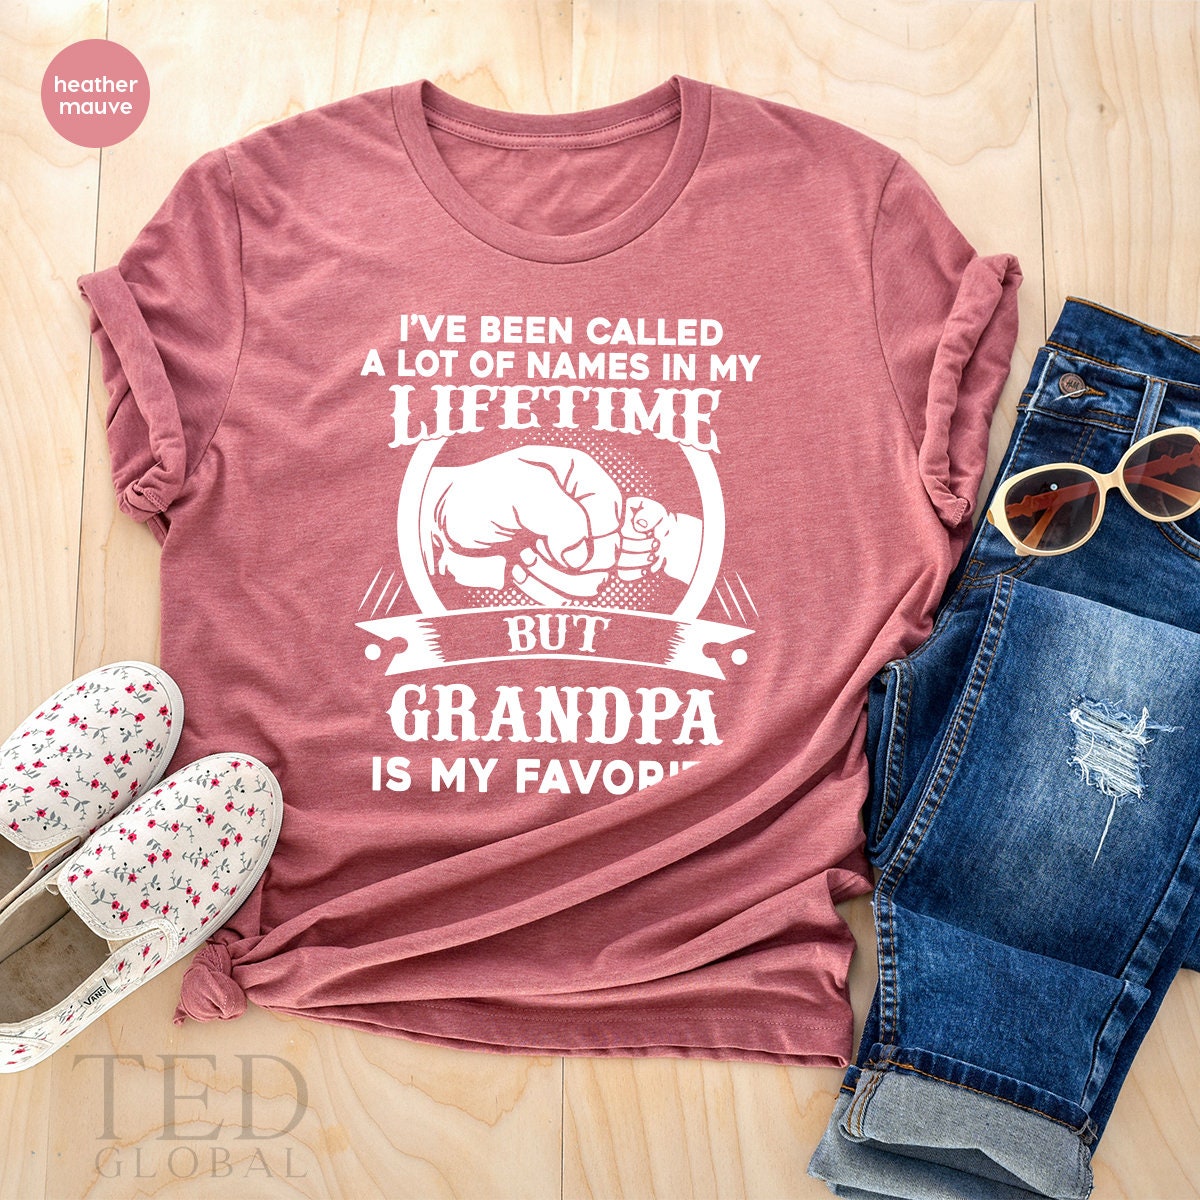 Best Papaw T-Shirt,Awesome Grumpy Gift,I've Been Called A Lot Of Names In My Life Time Grandpa Is My Favorite TShirt,Grampa Birthday Tee - Fastdeliverytees.com